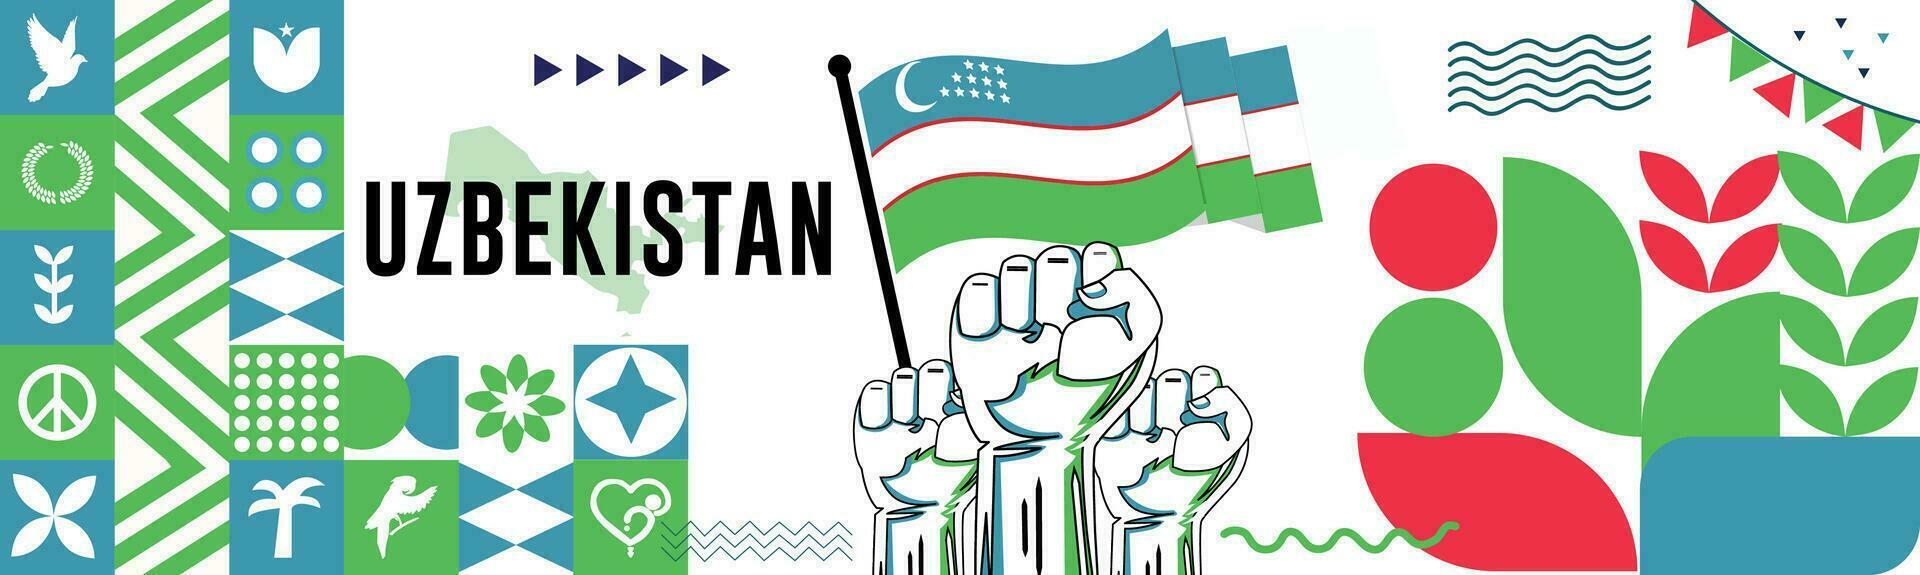 Uzbekistan national day banner with map, flag colors theme background and geometric abstract retro modern colorfull design with raised hands or fists. vector